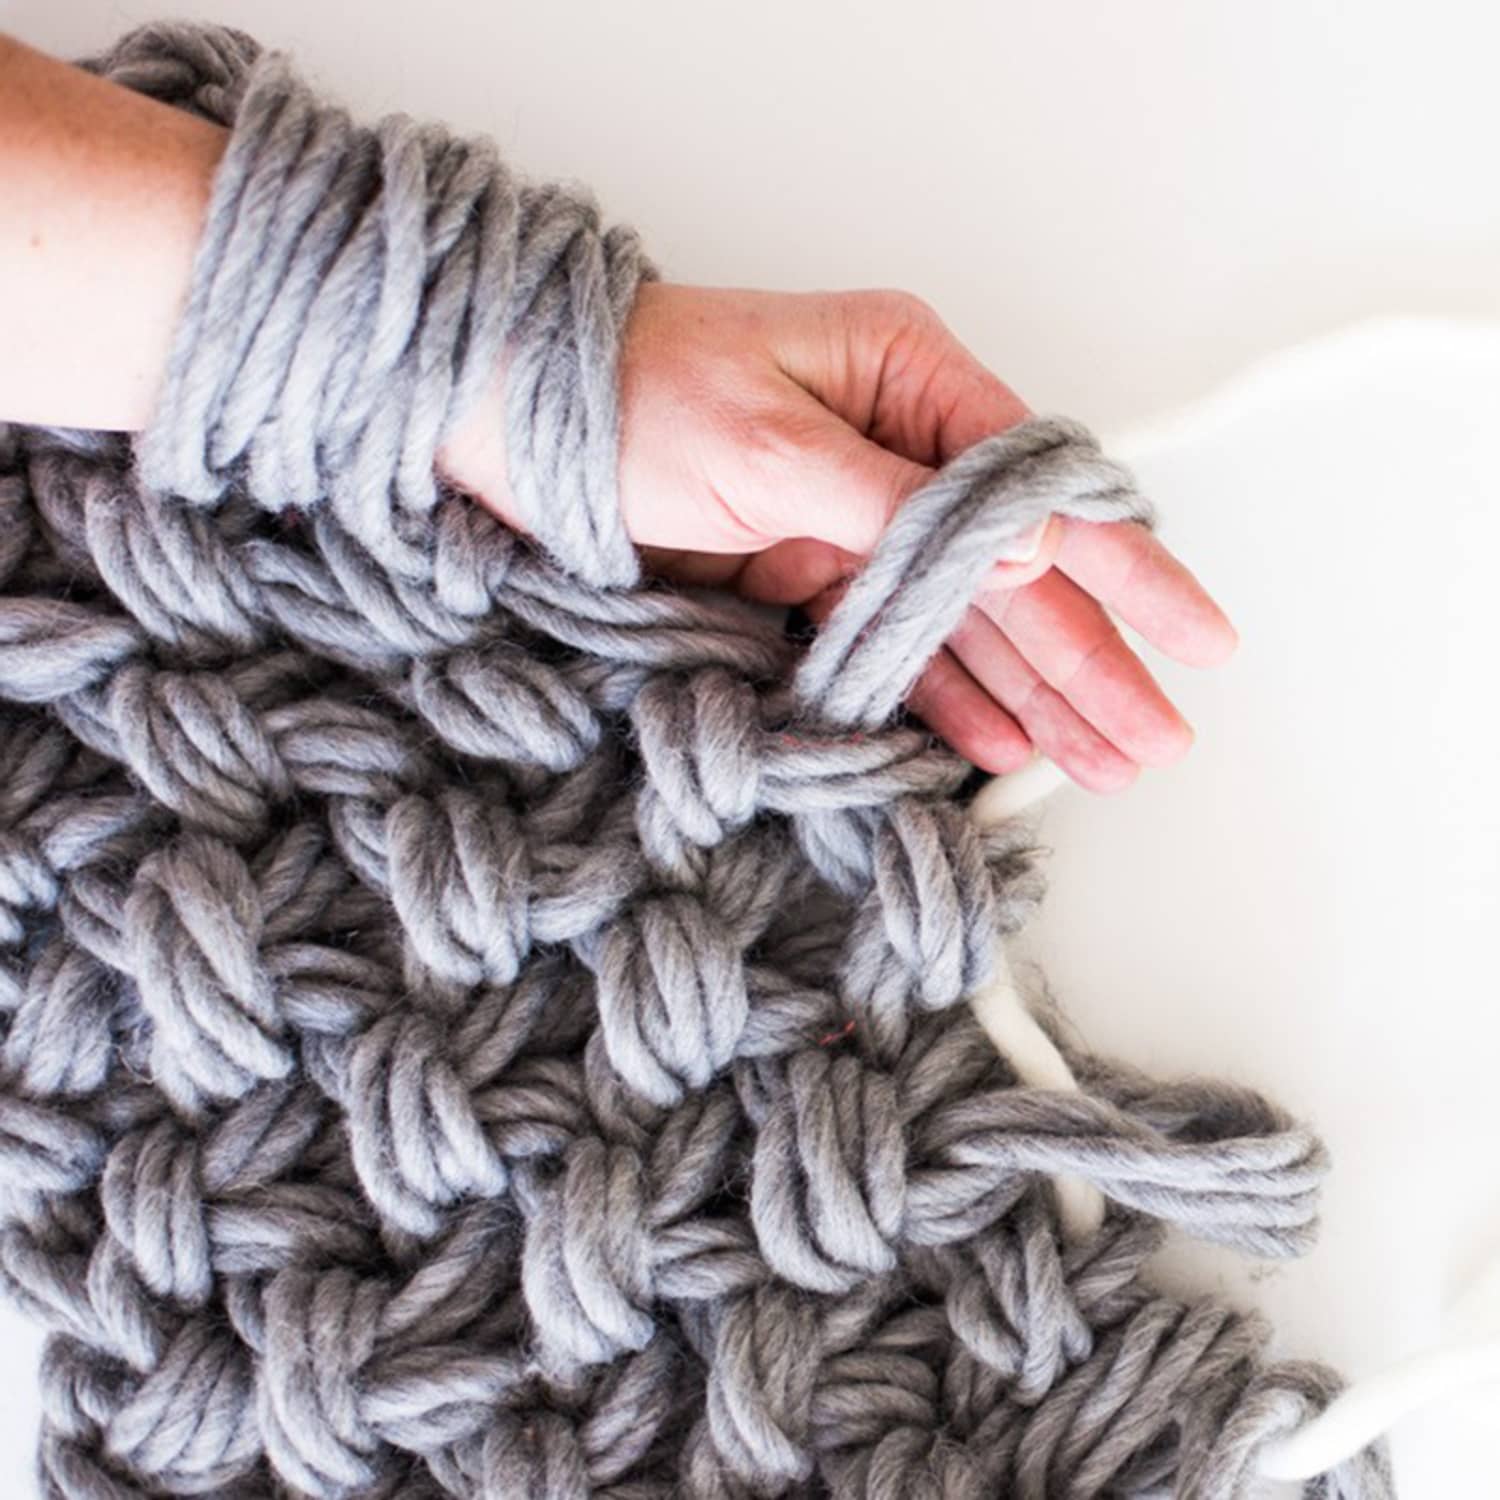 Arm Knitting - Everything You've Ever Wanted to Know